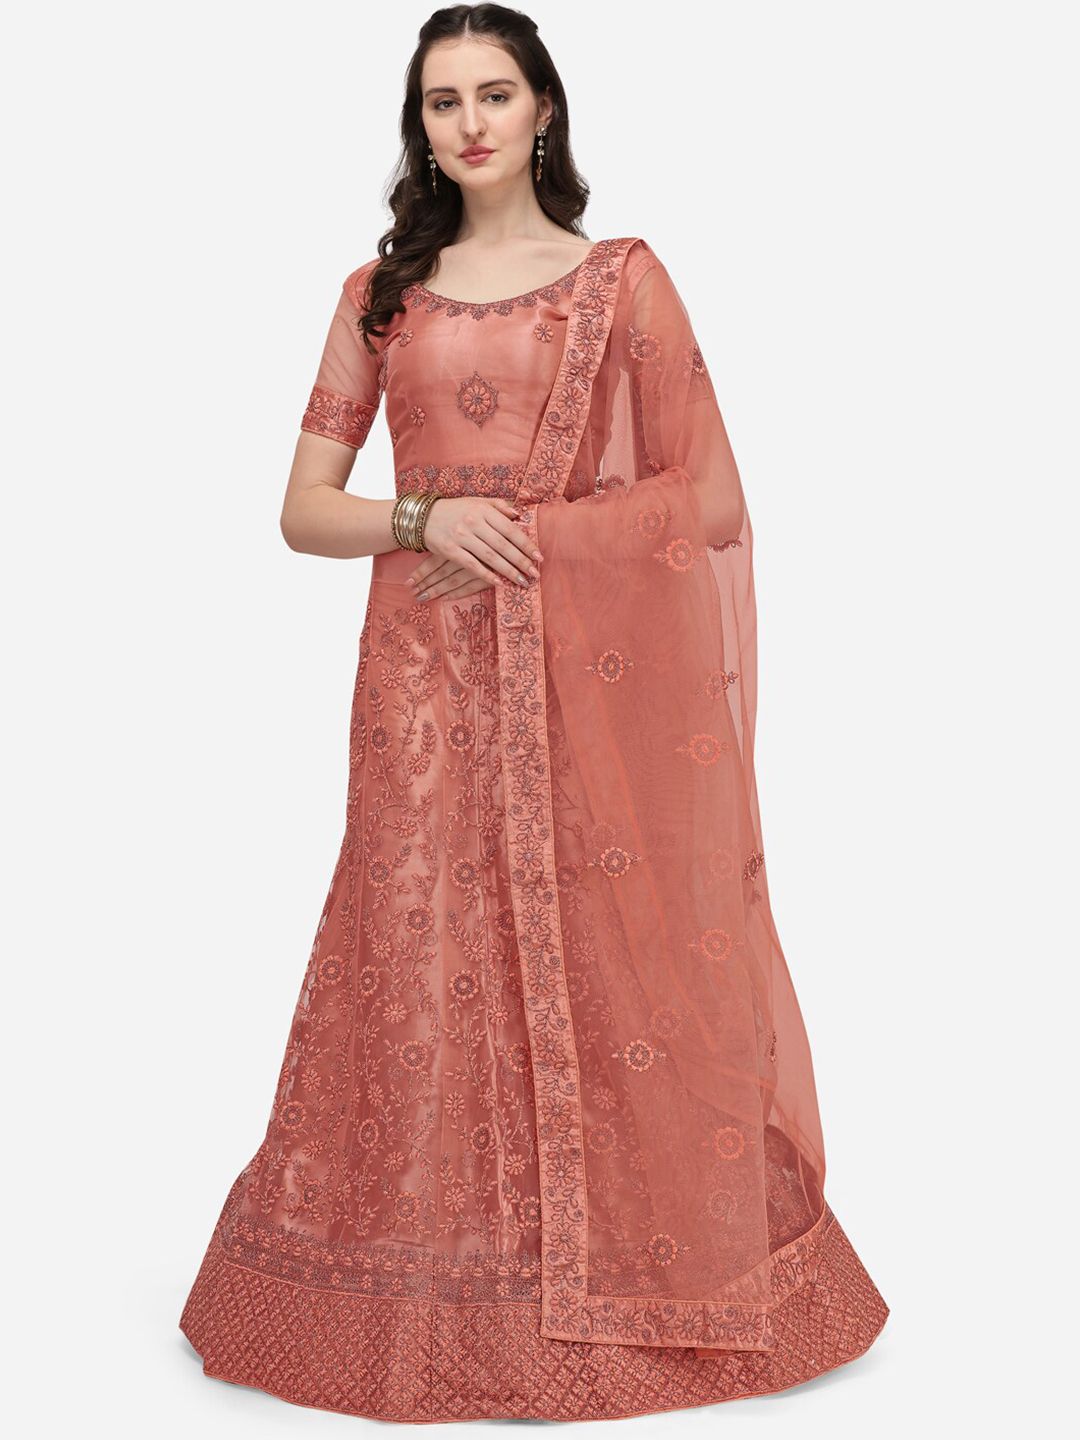 Netram Peach & Silve Embroidered Semi-Stitched Lehenga & Unstitched Blouse With Dupatta Price in India